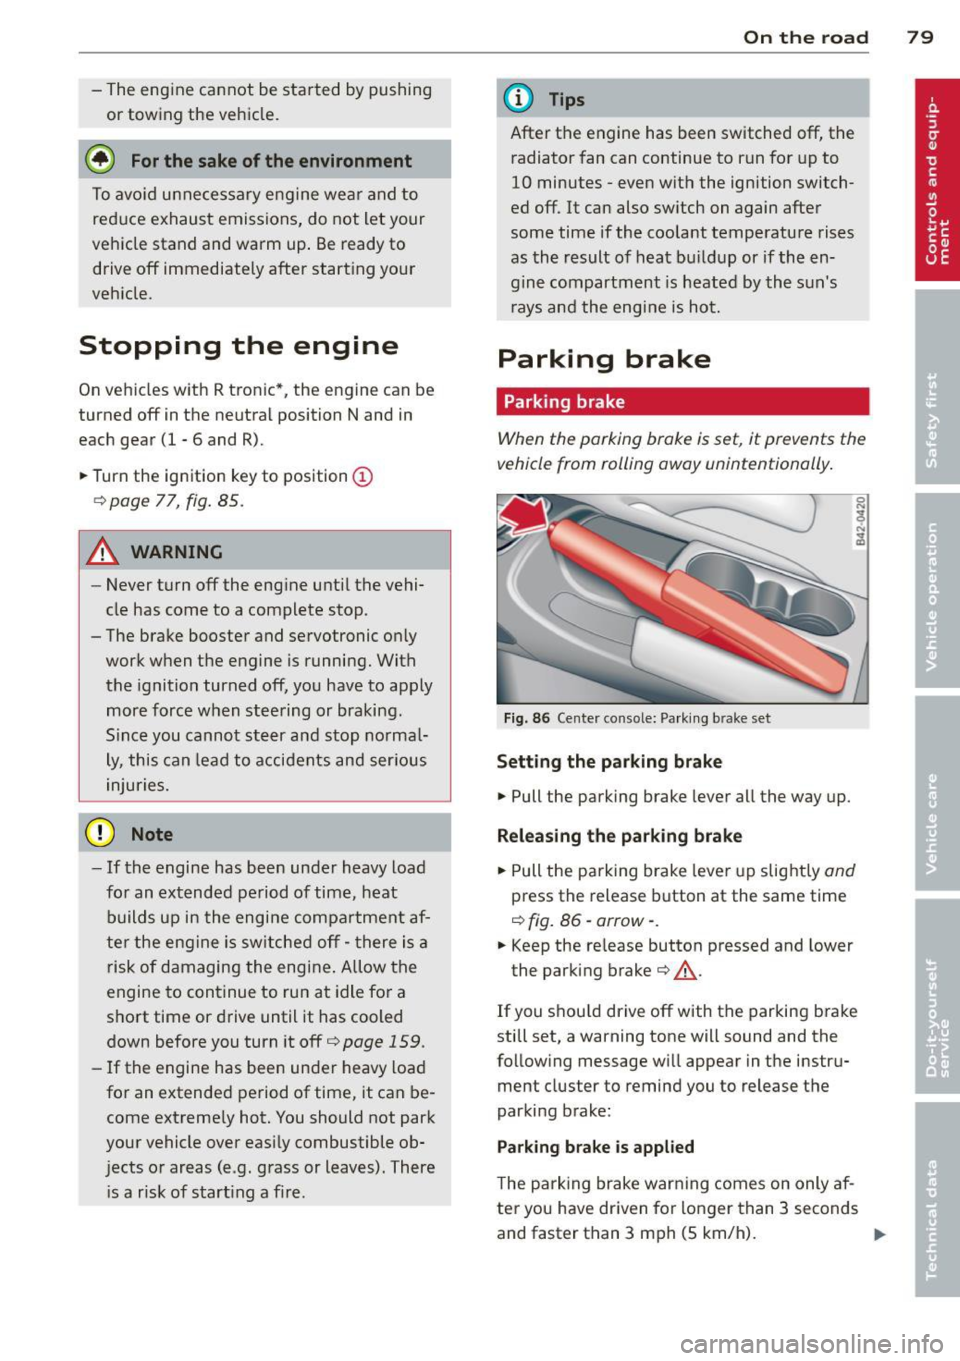 AUDI R8 SPYDER 2011  Owners Manual -The engine  c annot  be started  by pushing 
or towing  the  vehicle. 
@) For the  sake of the  environment 
To avo id  u nnecessary engine  wea r and to 
reduce exhaust  emissions,  do not  let  you